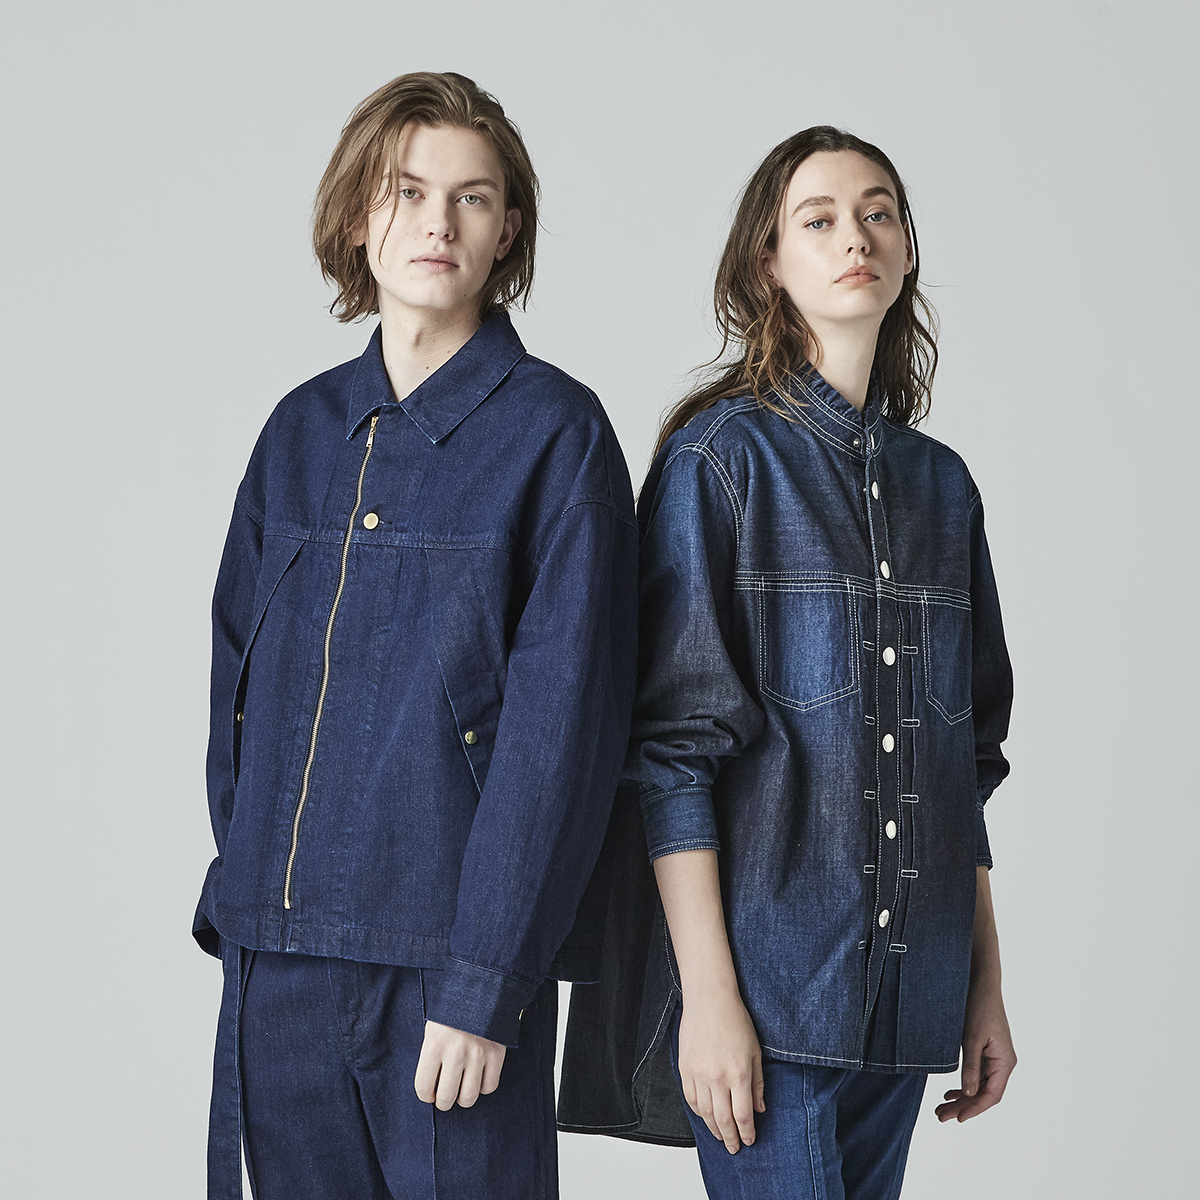 JAPAN DENIM’s flagship store opens at GINZA SIX on 2023.3.1 (Wed) !